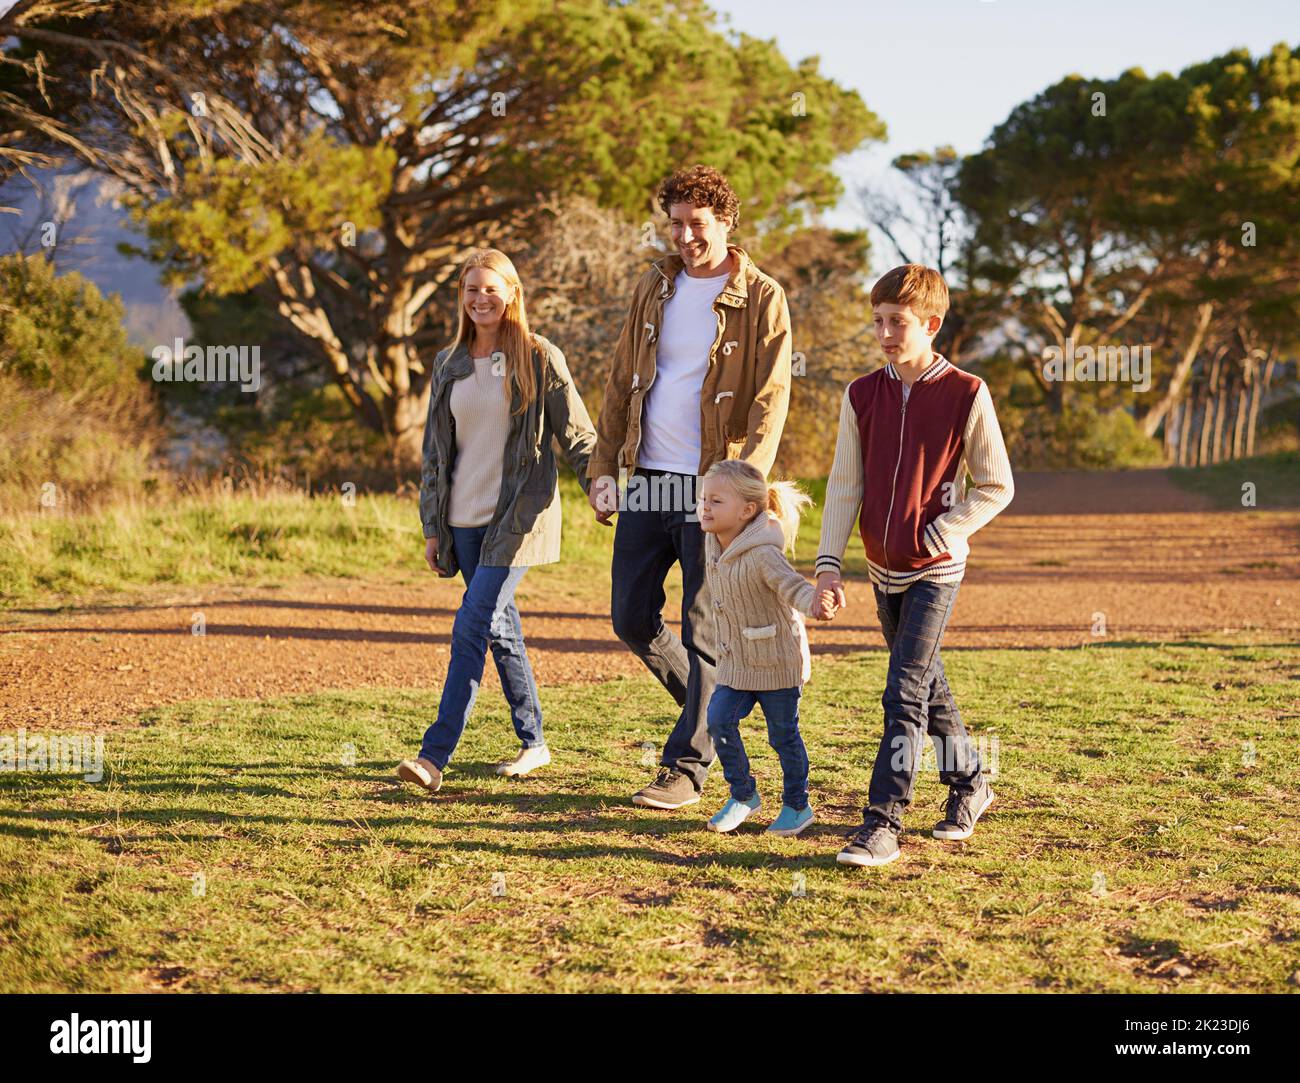 On a leisurely family stroll. a young family enjoying a walk in the outdoors. Stock Photo